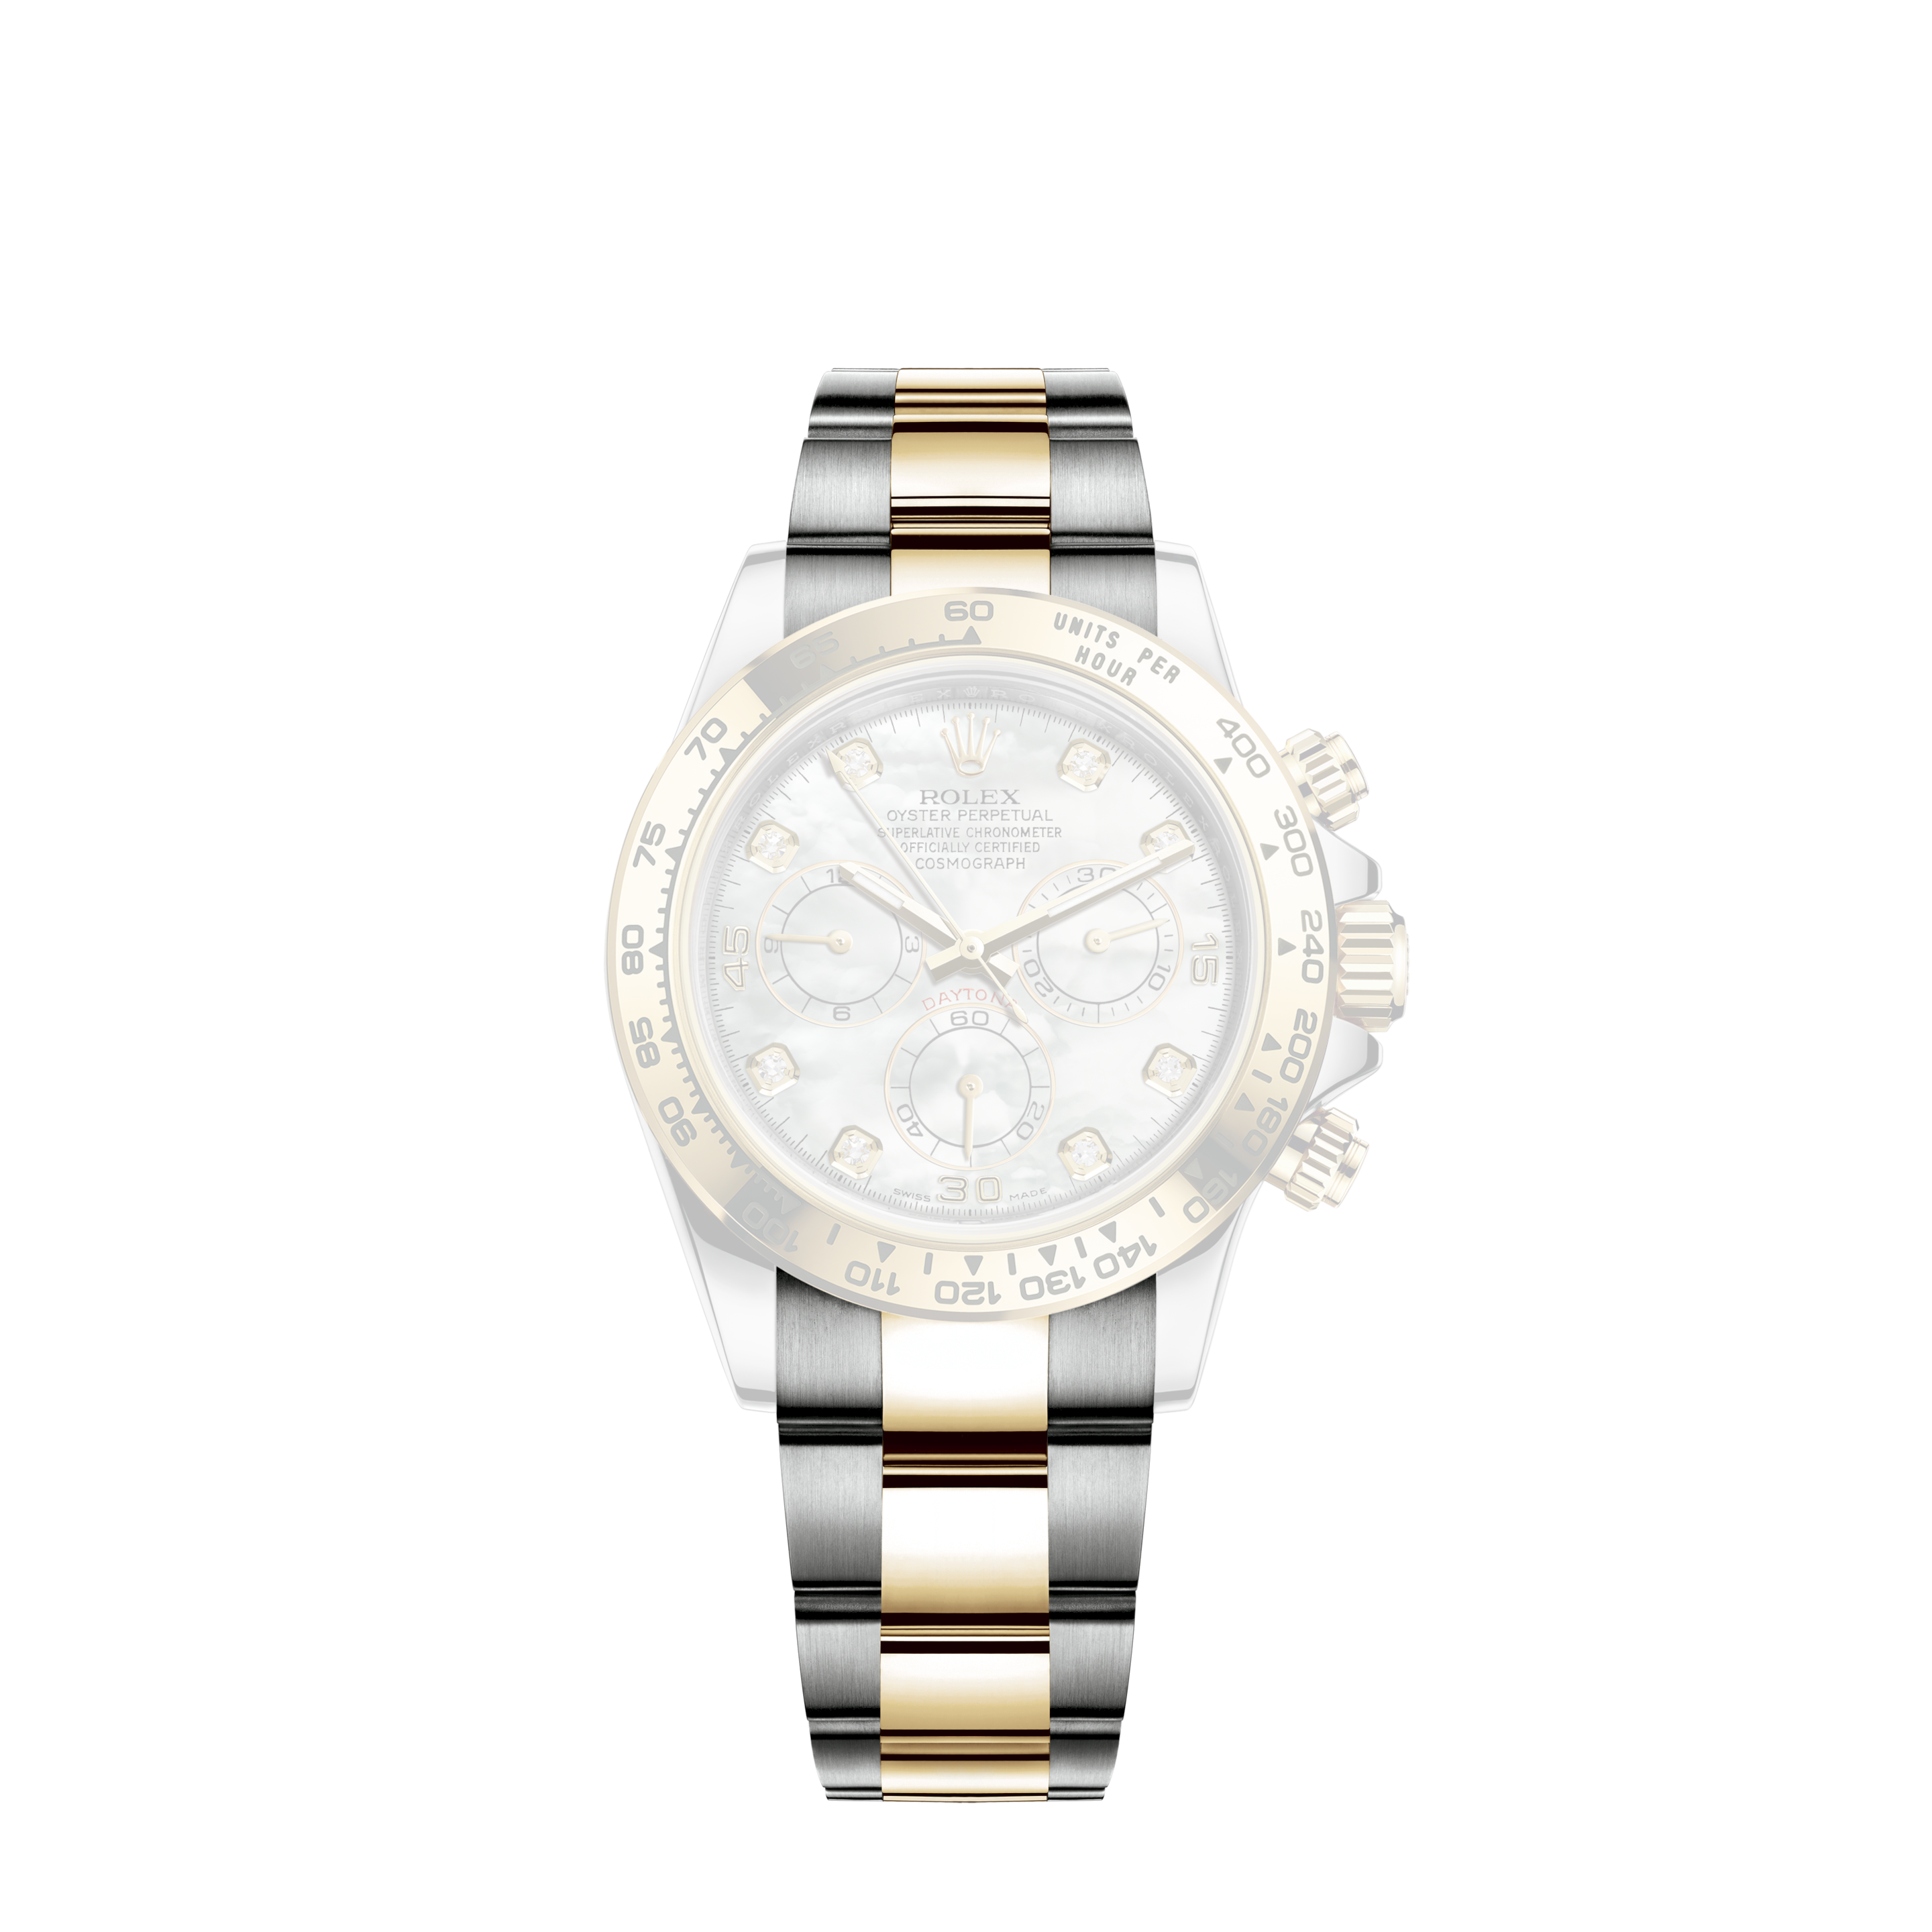 Rolex 16013 Gold/Steel Rolex Datejust 2017 Revision, Bullseye Dial top Zustand, two tone